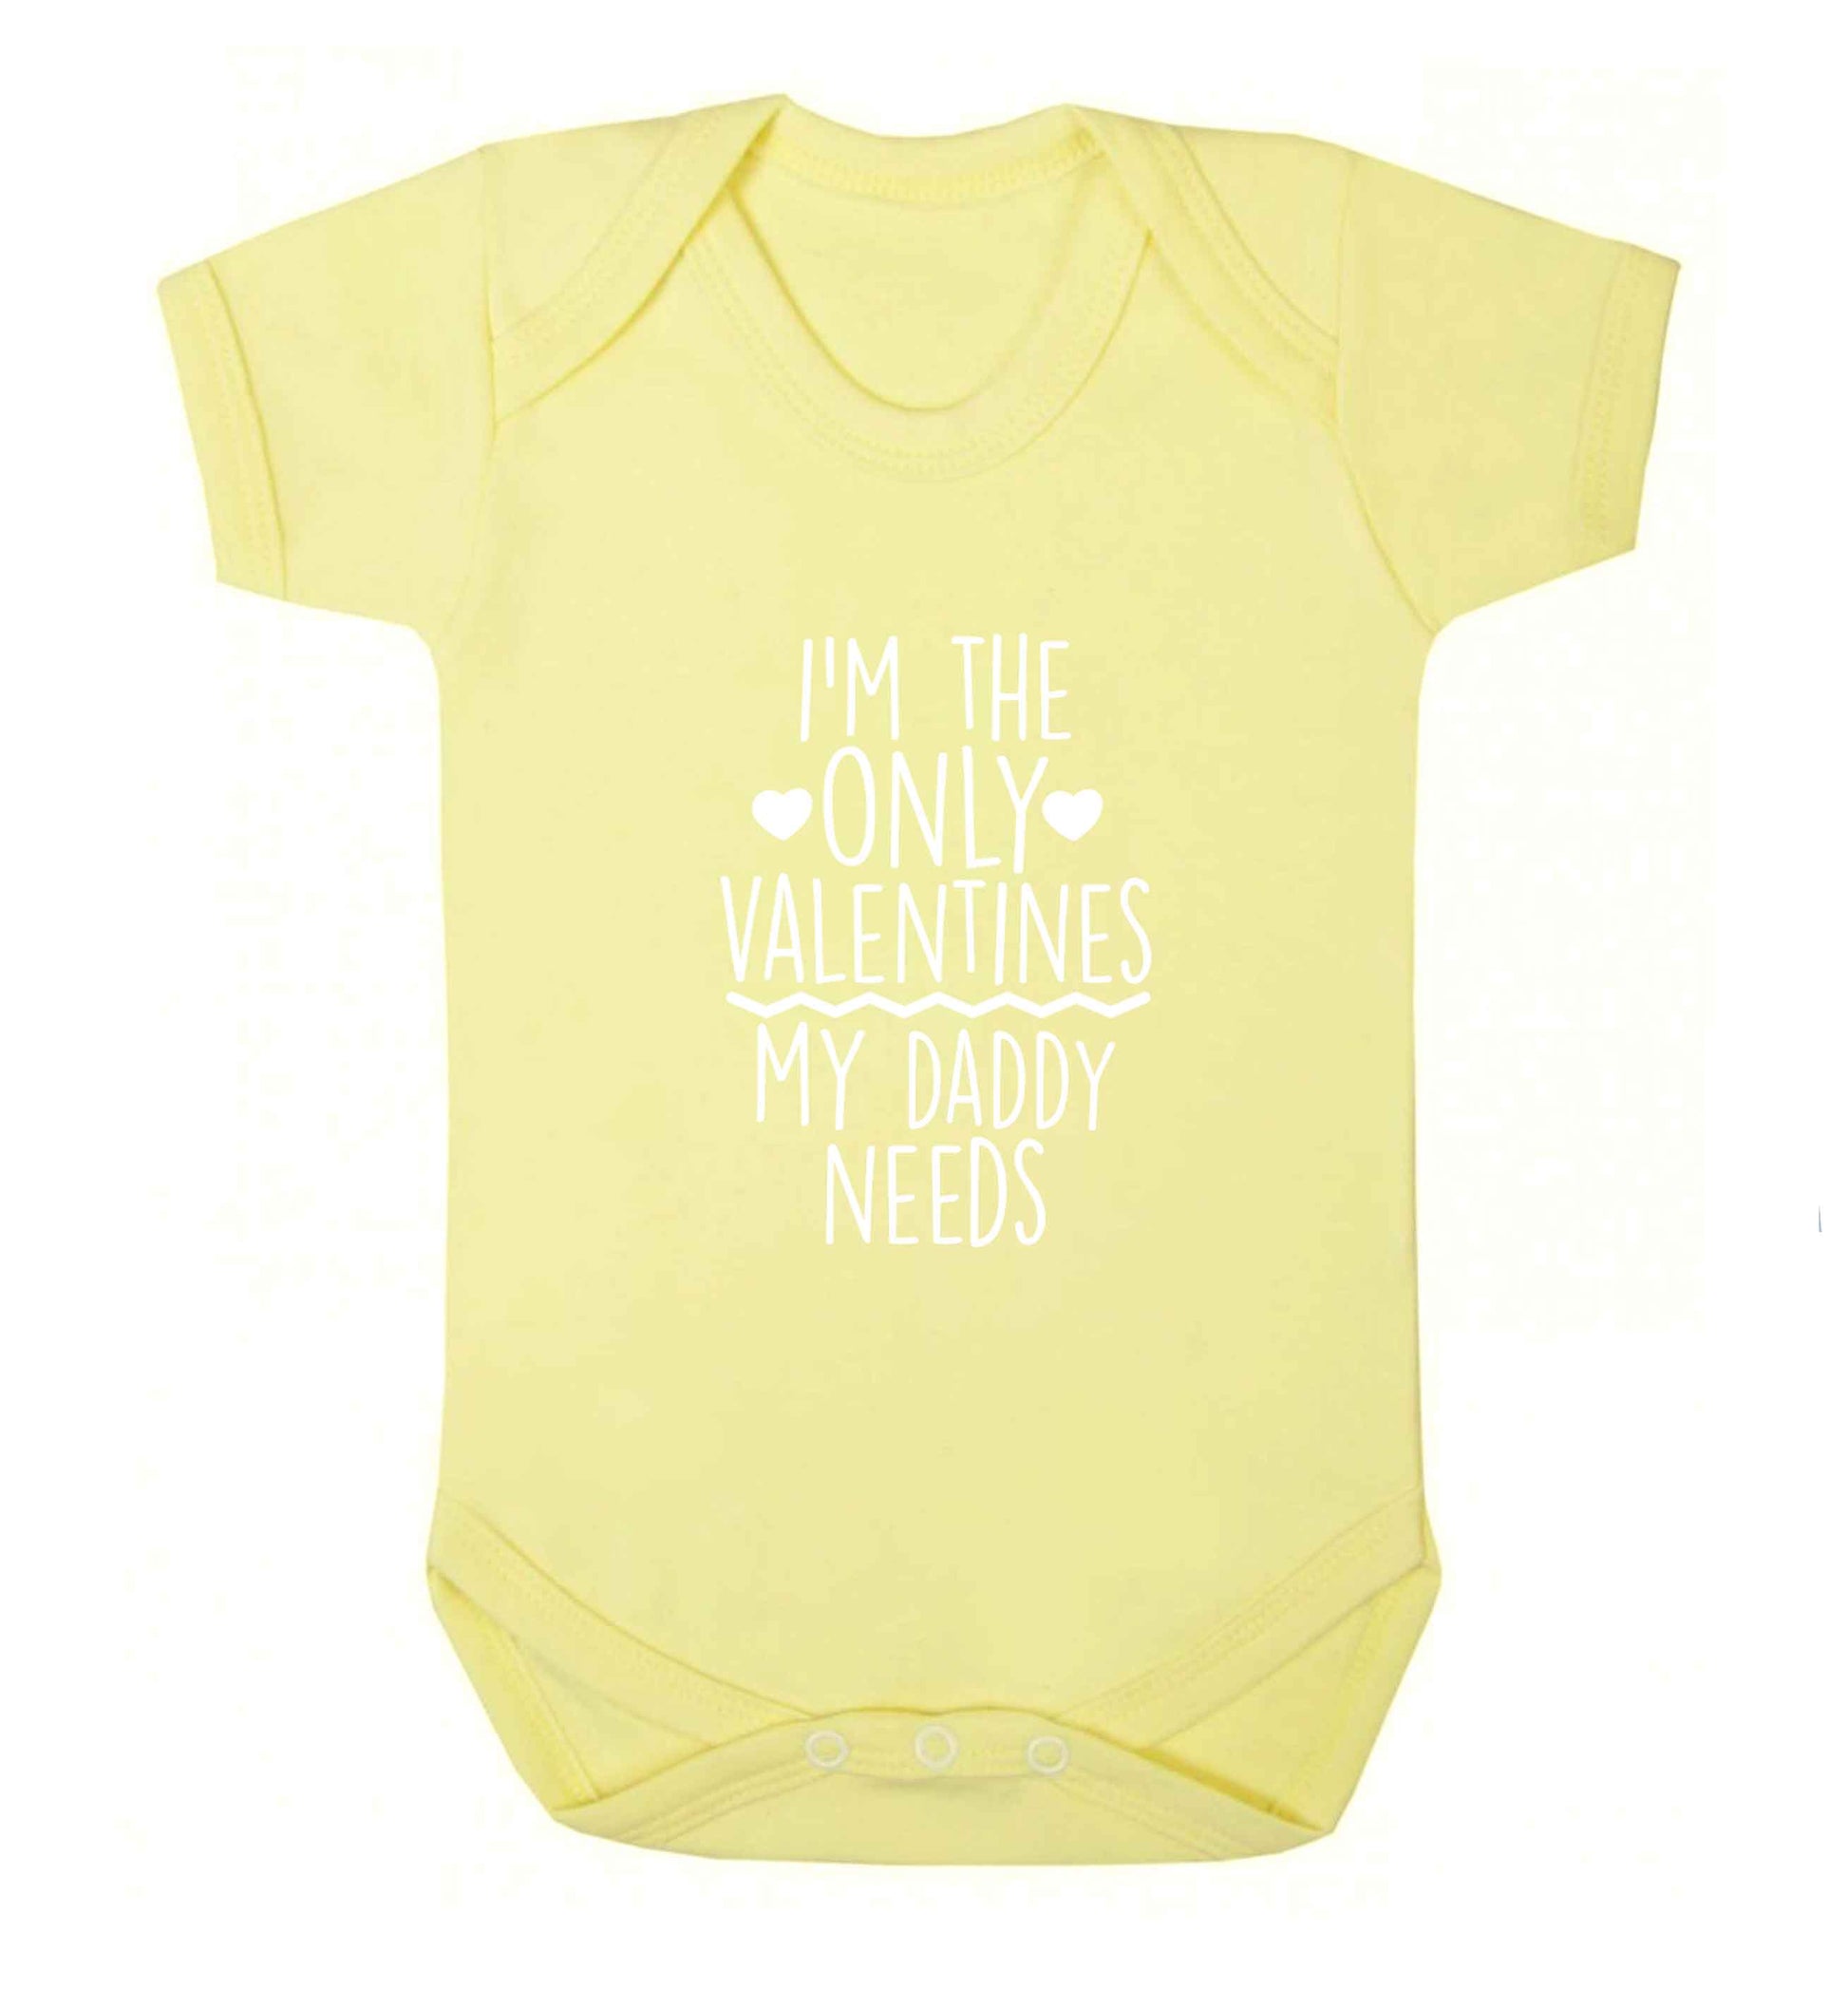 I'm the only valentines my daddy needs baby vest pale yellow 18-24 months